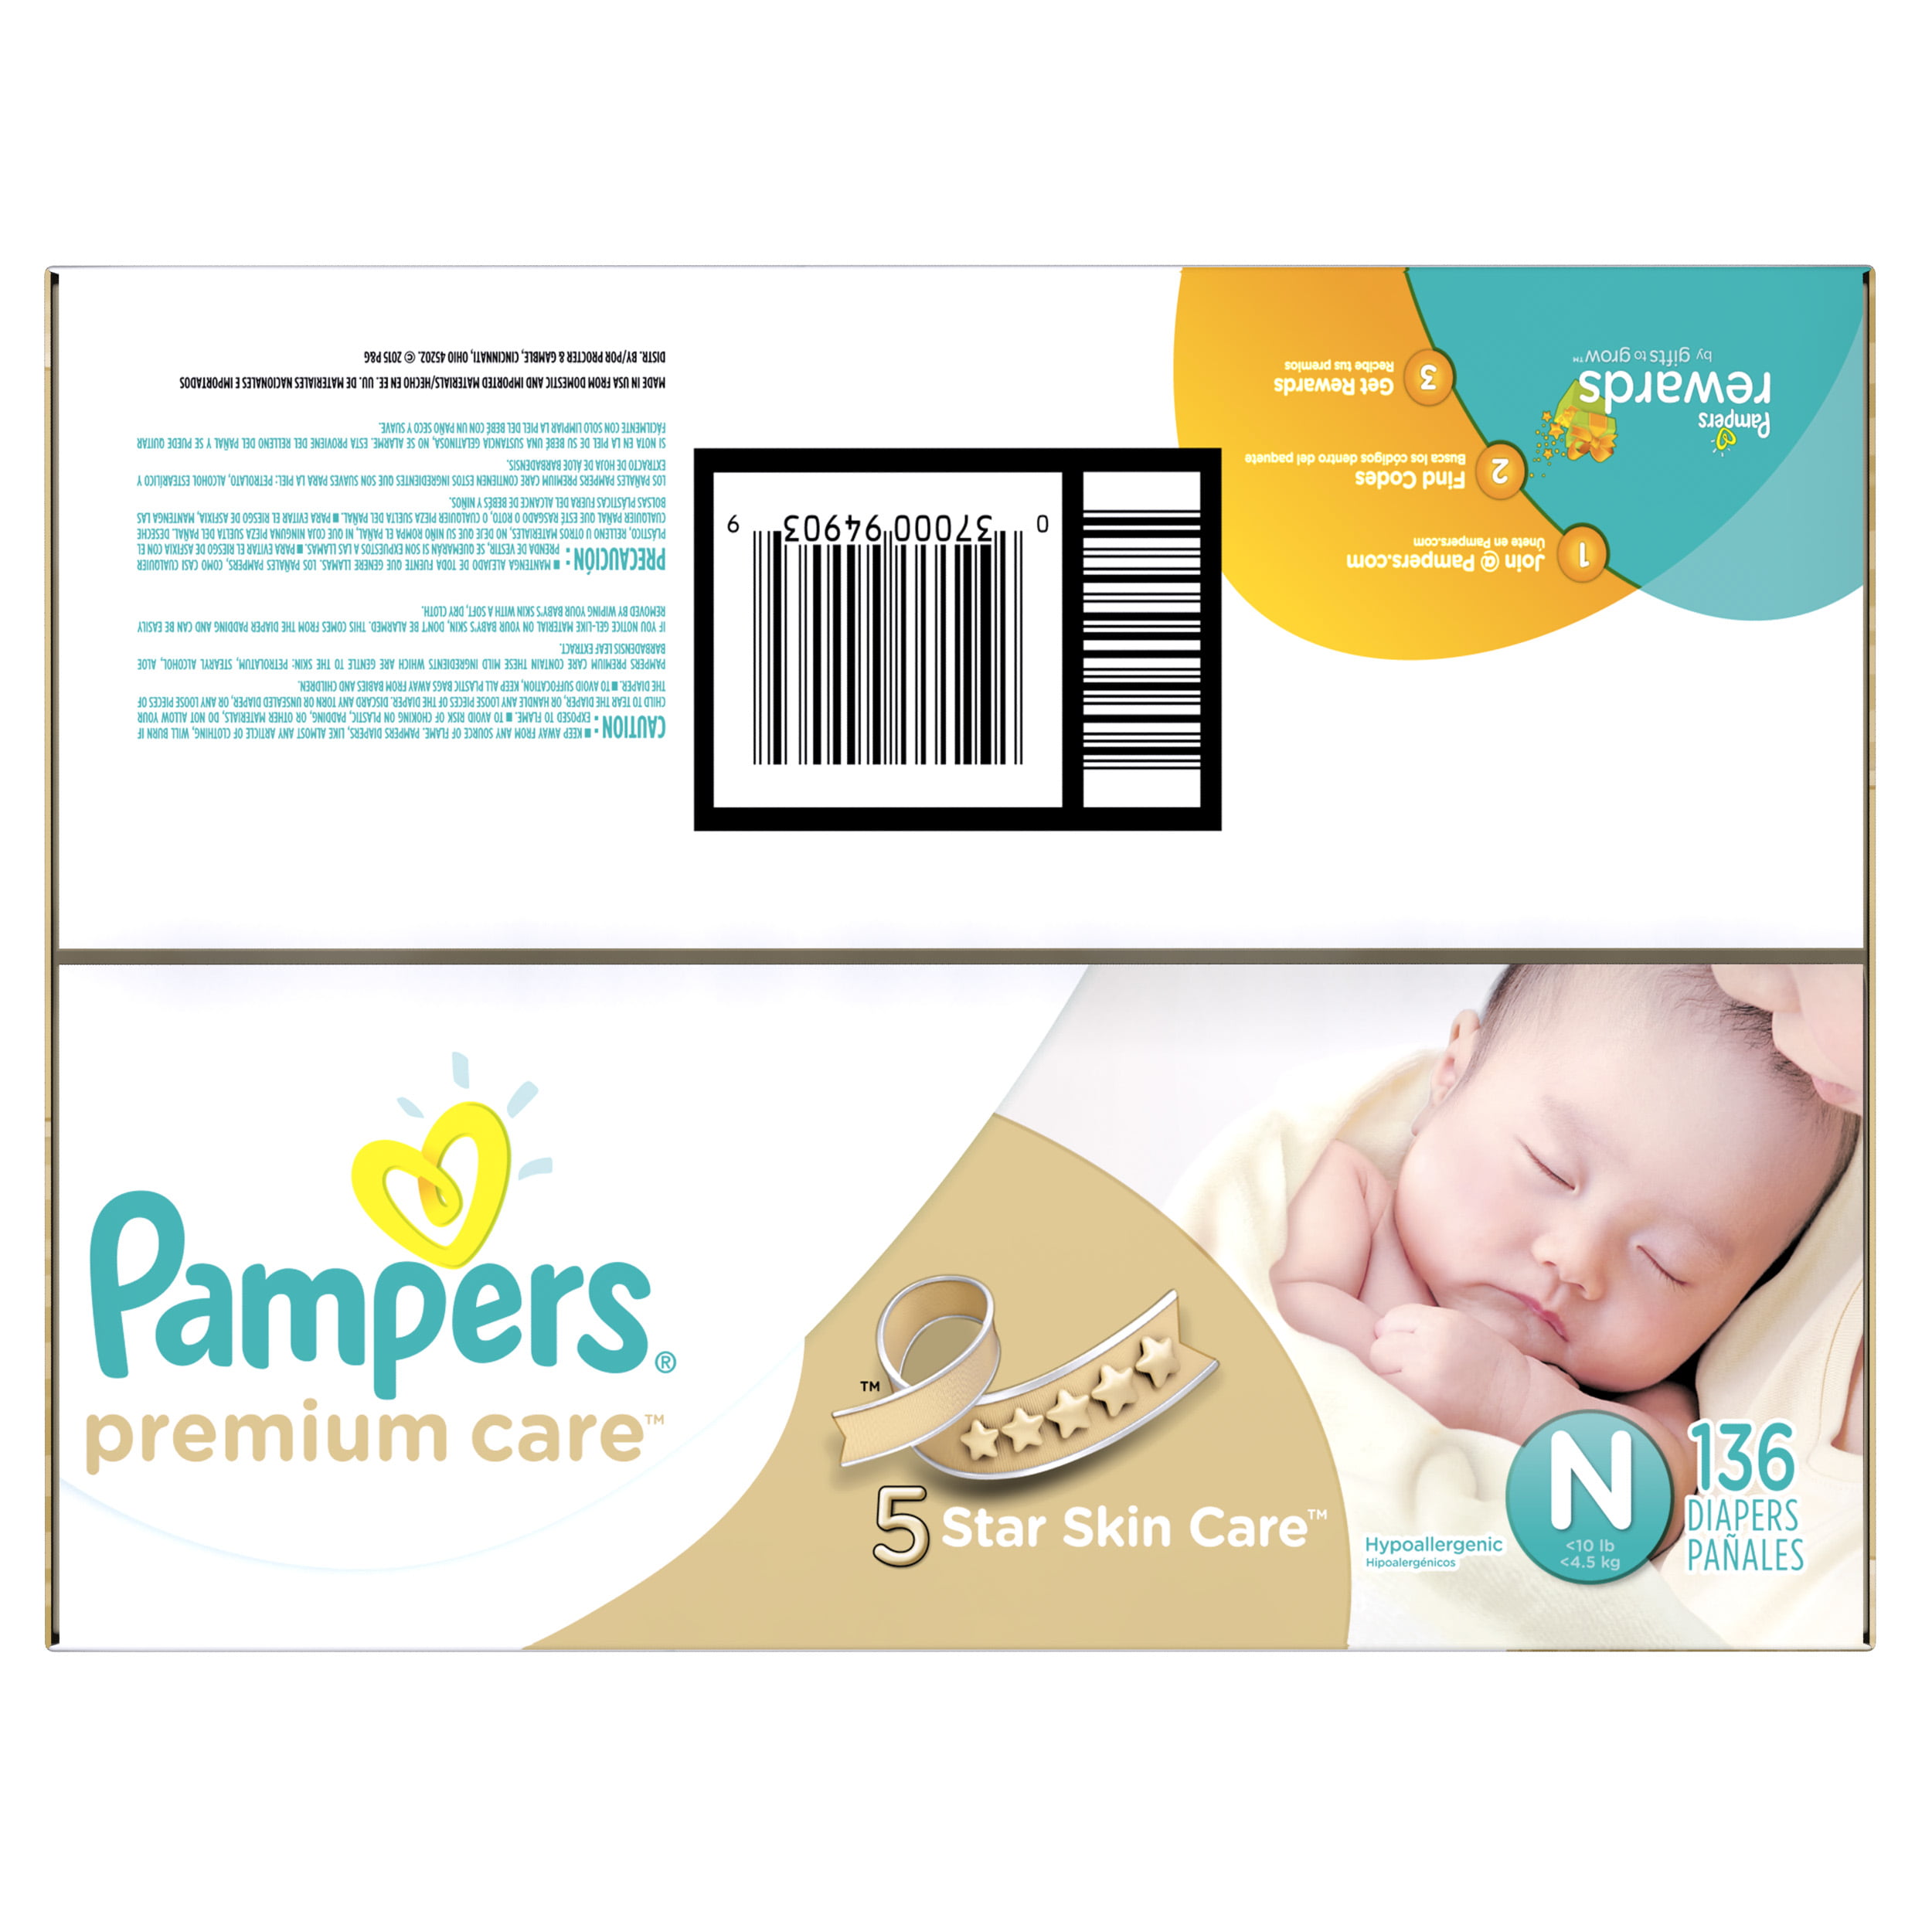 Promo Pampers Premium Protection Pants Couches culottes T4 9 - 15 kg